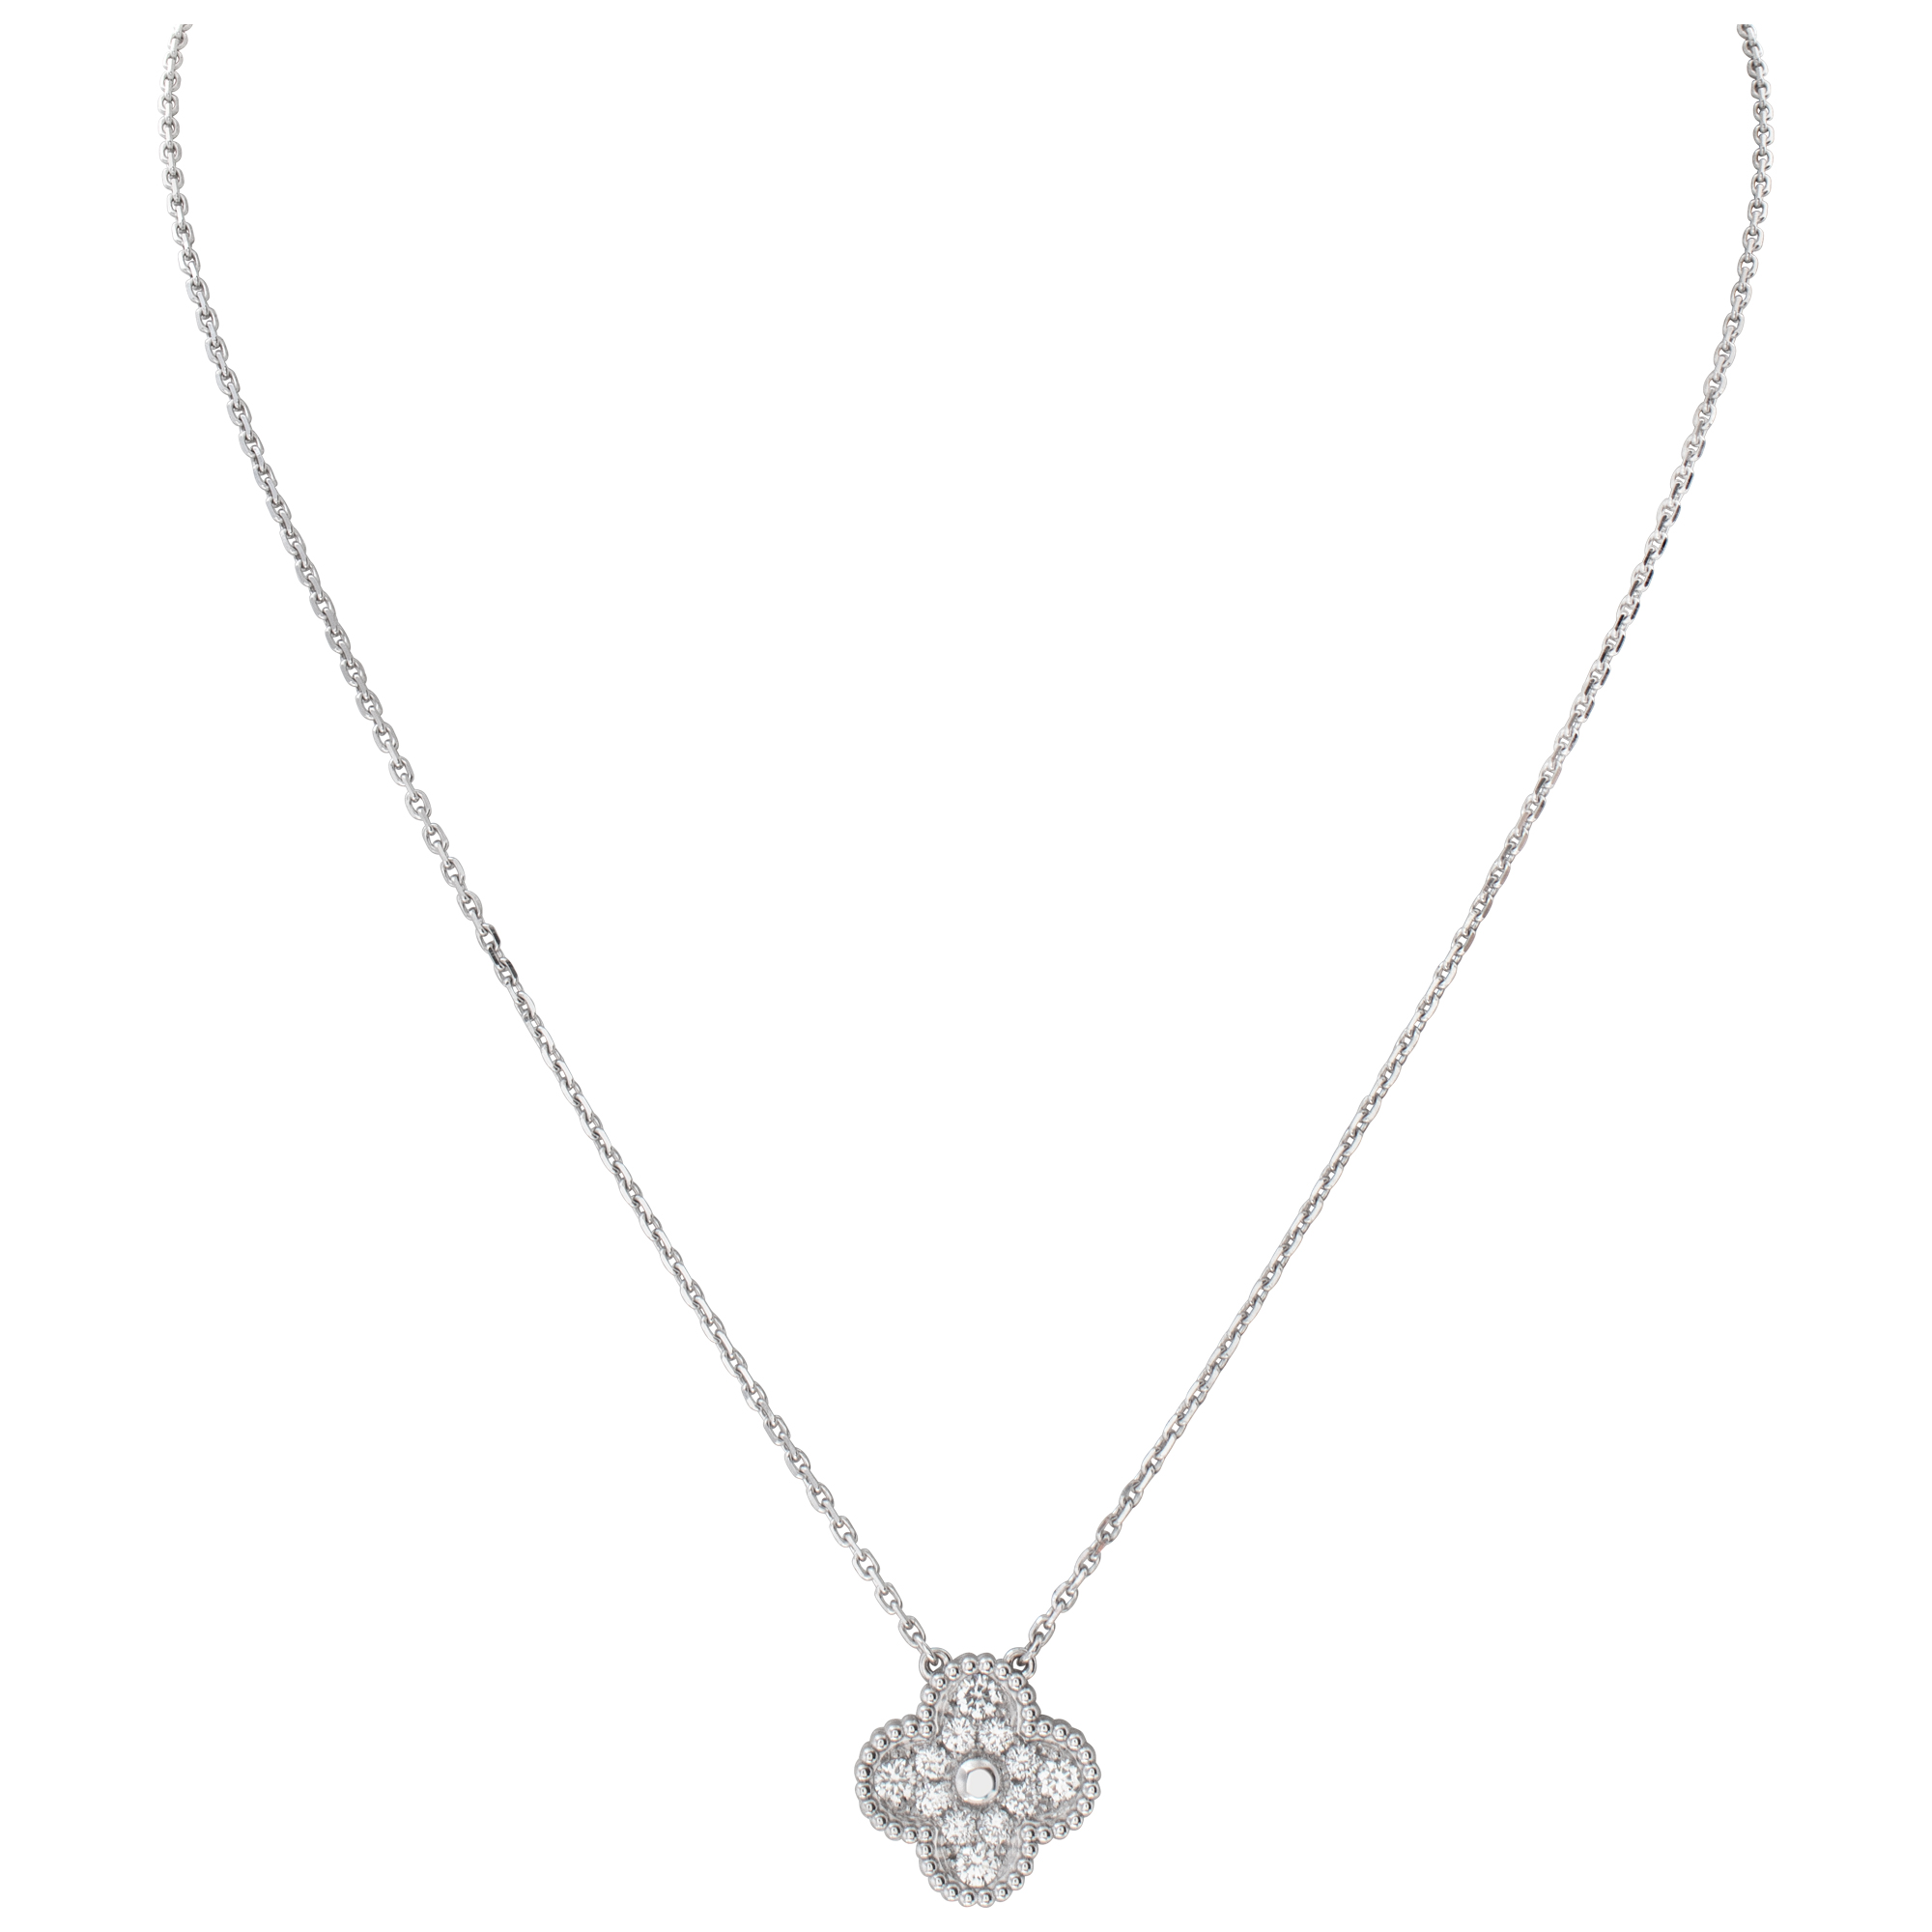 Van Cleef & Arpels Vintage Alhambra pendant necklace in18k white gold with 0.48 ct in diamonds image 2